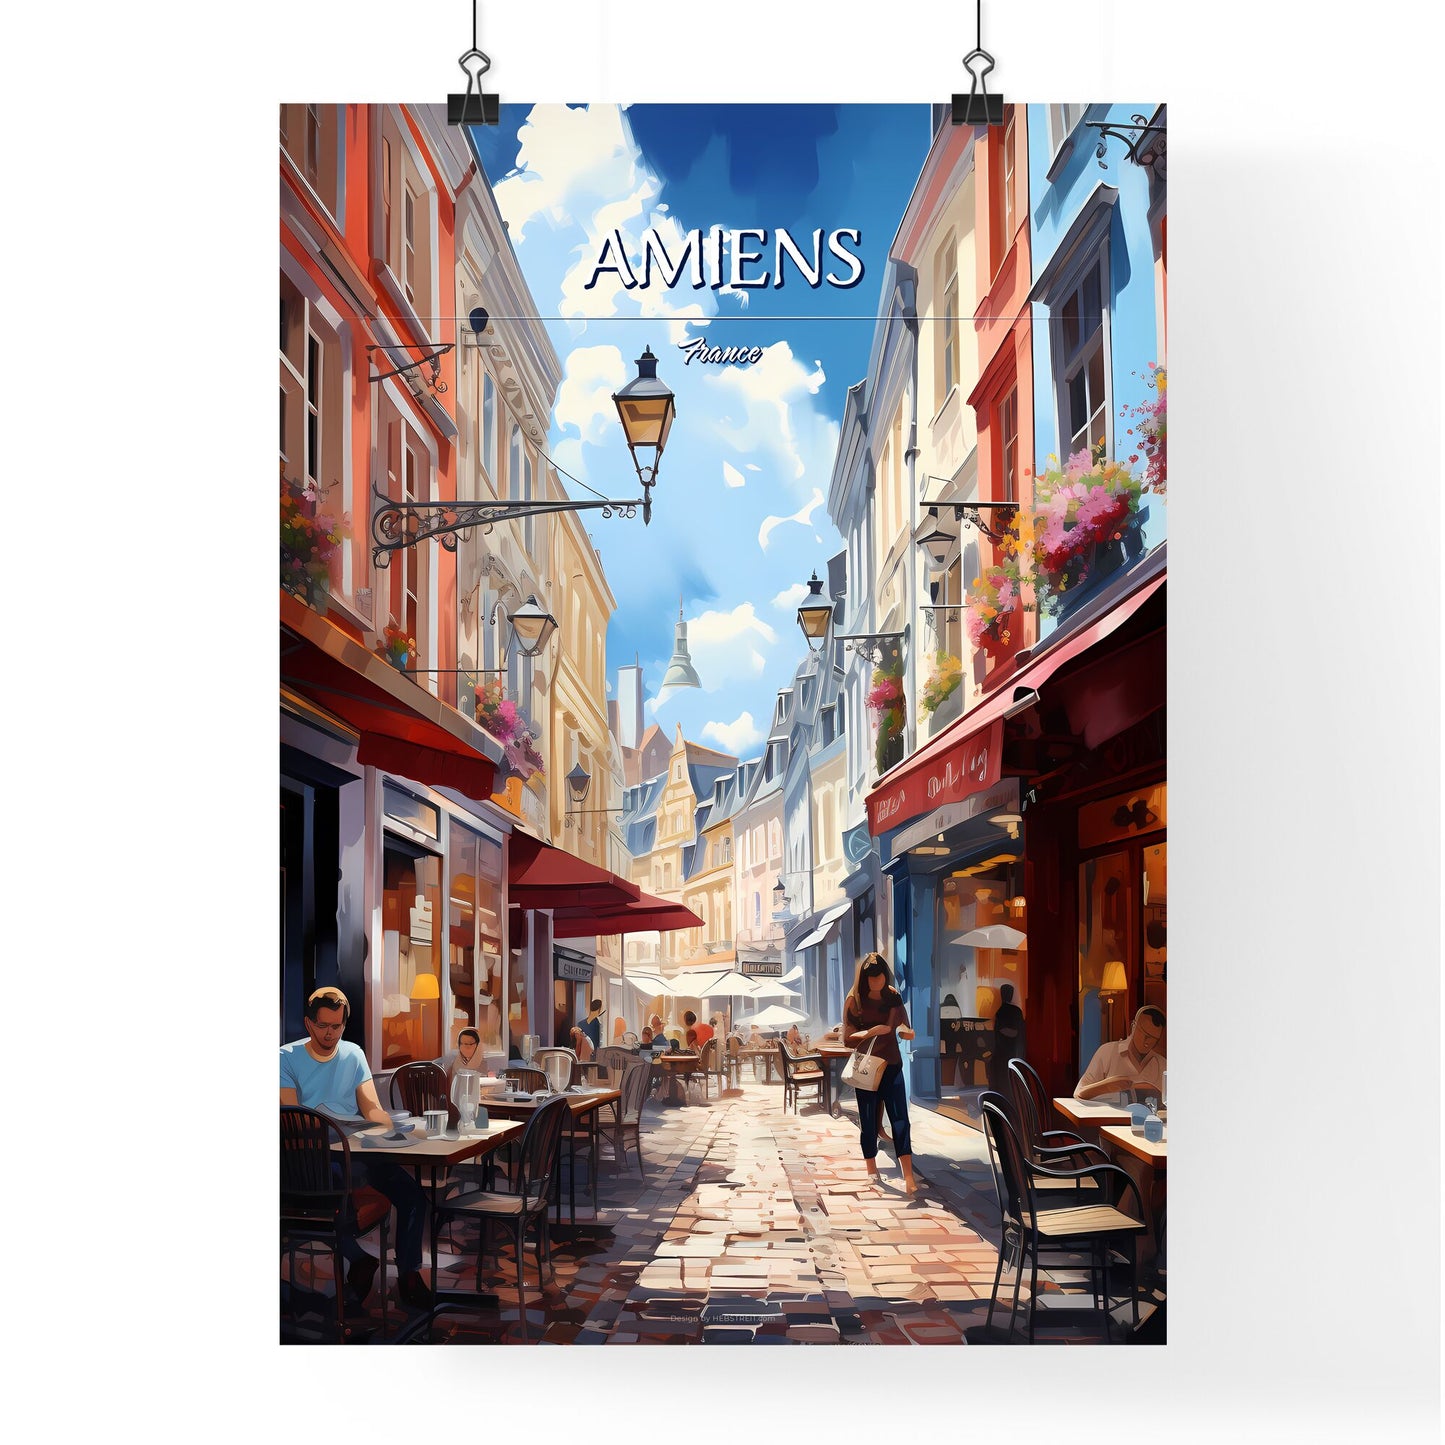 Amiens, France - Art print of a street with tables and chairs in a city Default Title